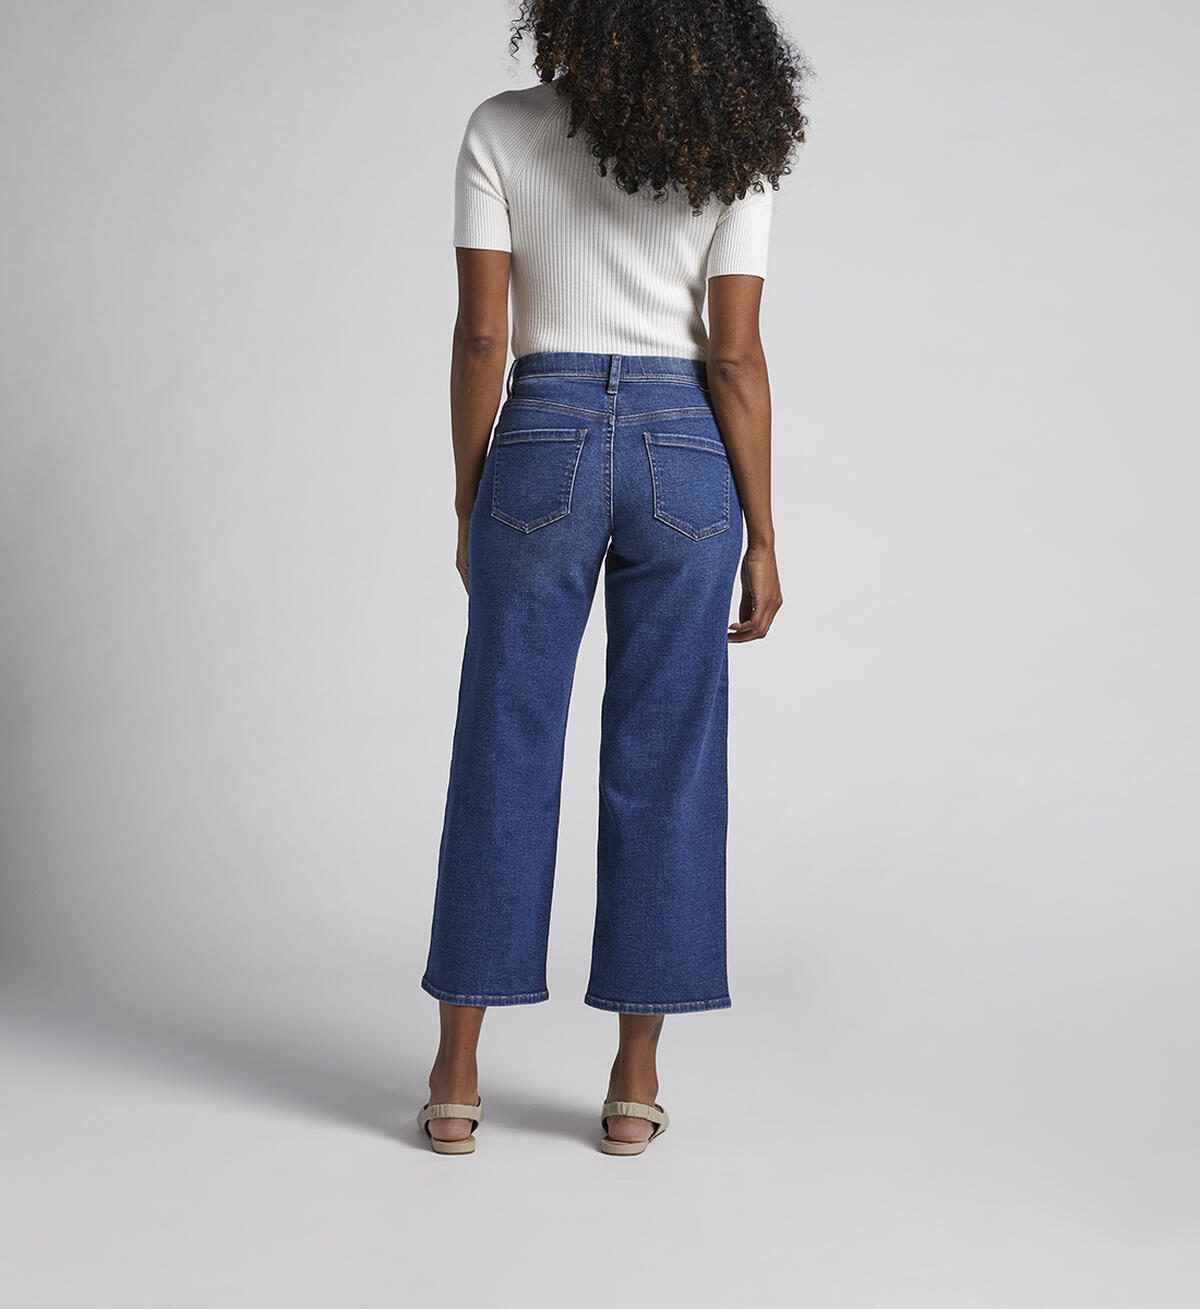 Ava Mid Rise Wide Leg Pull-On Jeans, , hi-res image number 1